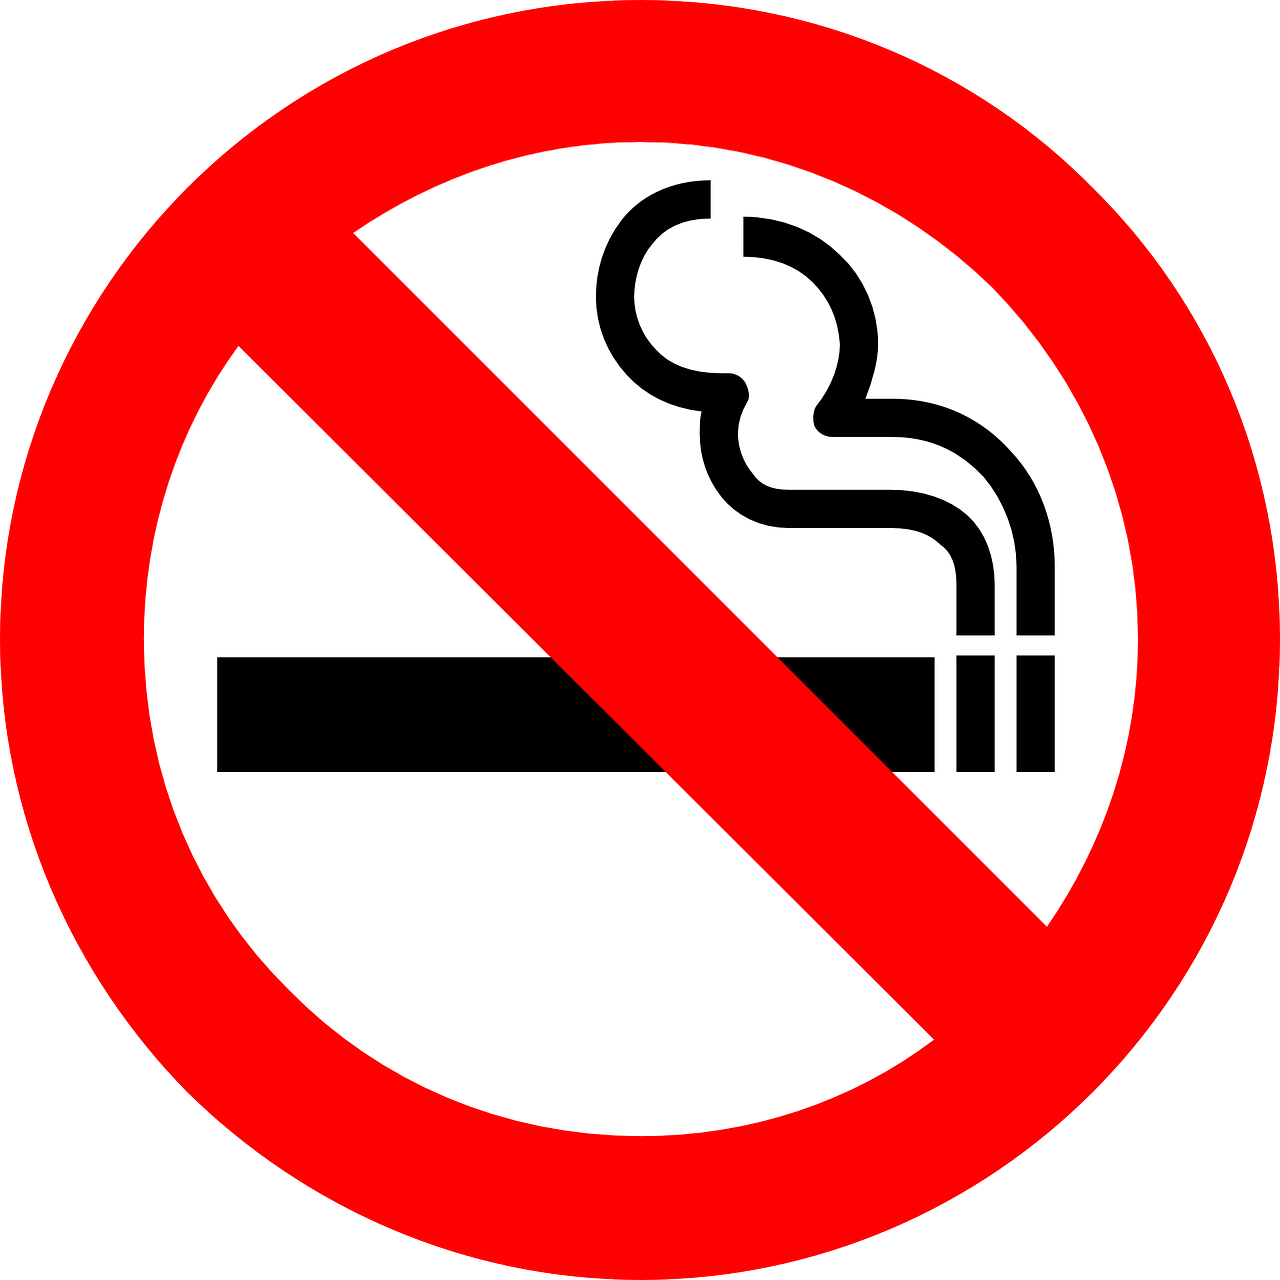 Top Four Reasons to Quit Smoking in Honor of The Great American Smokeout